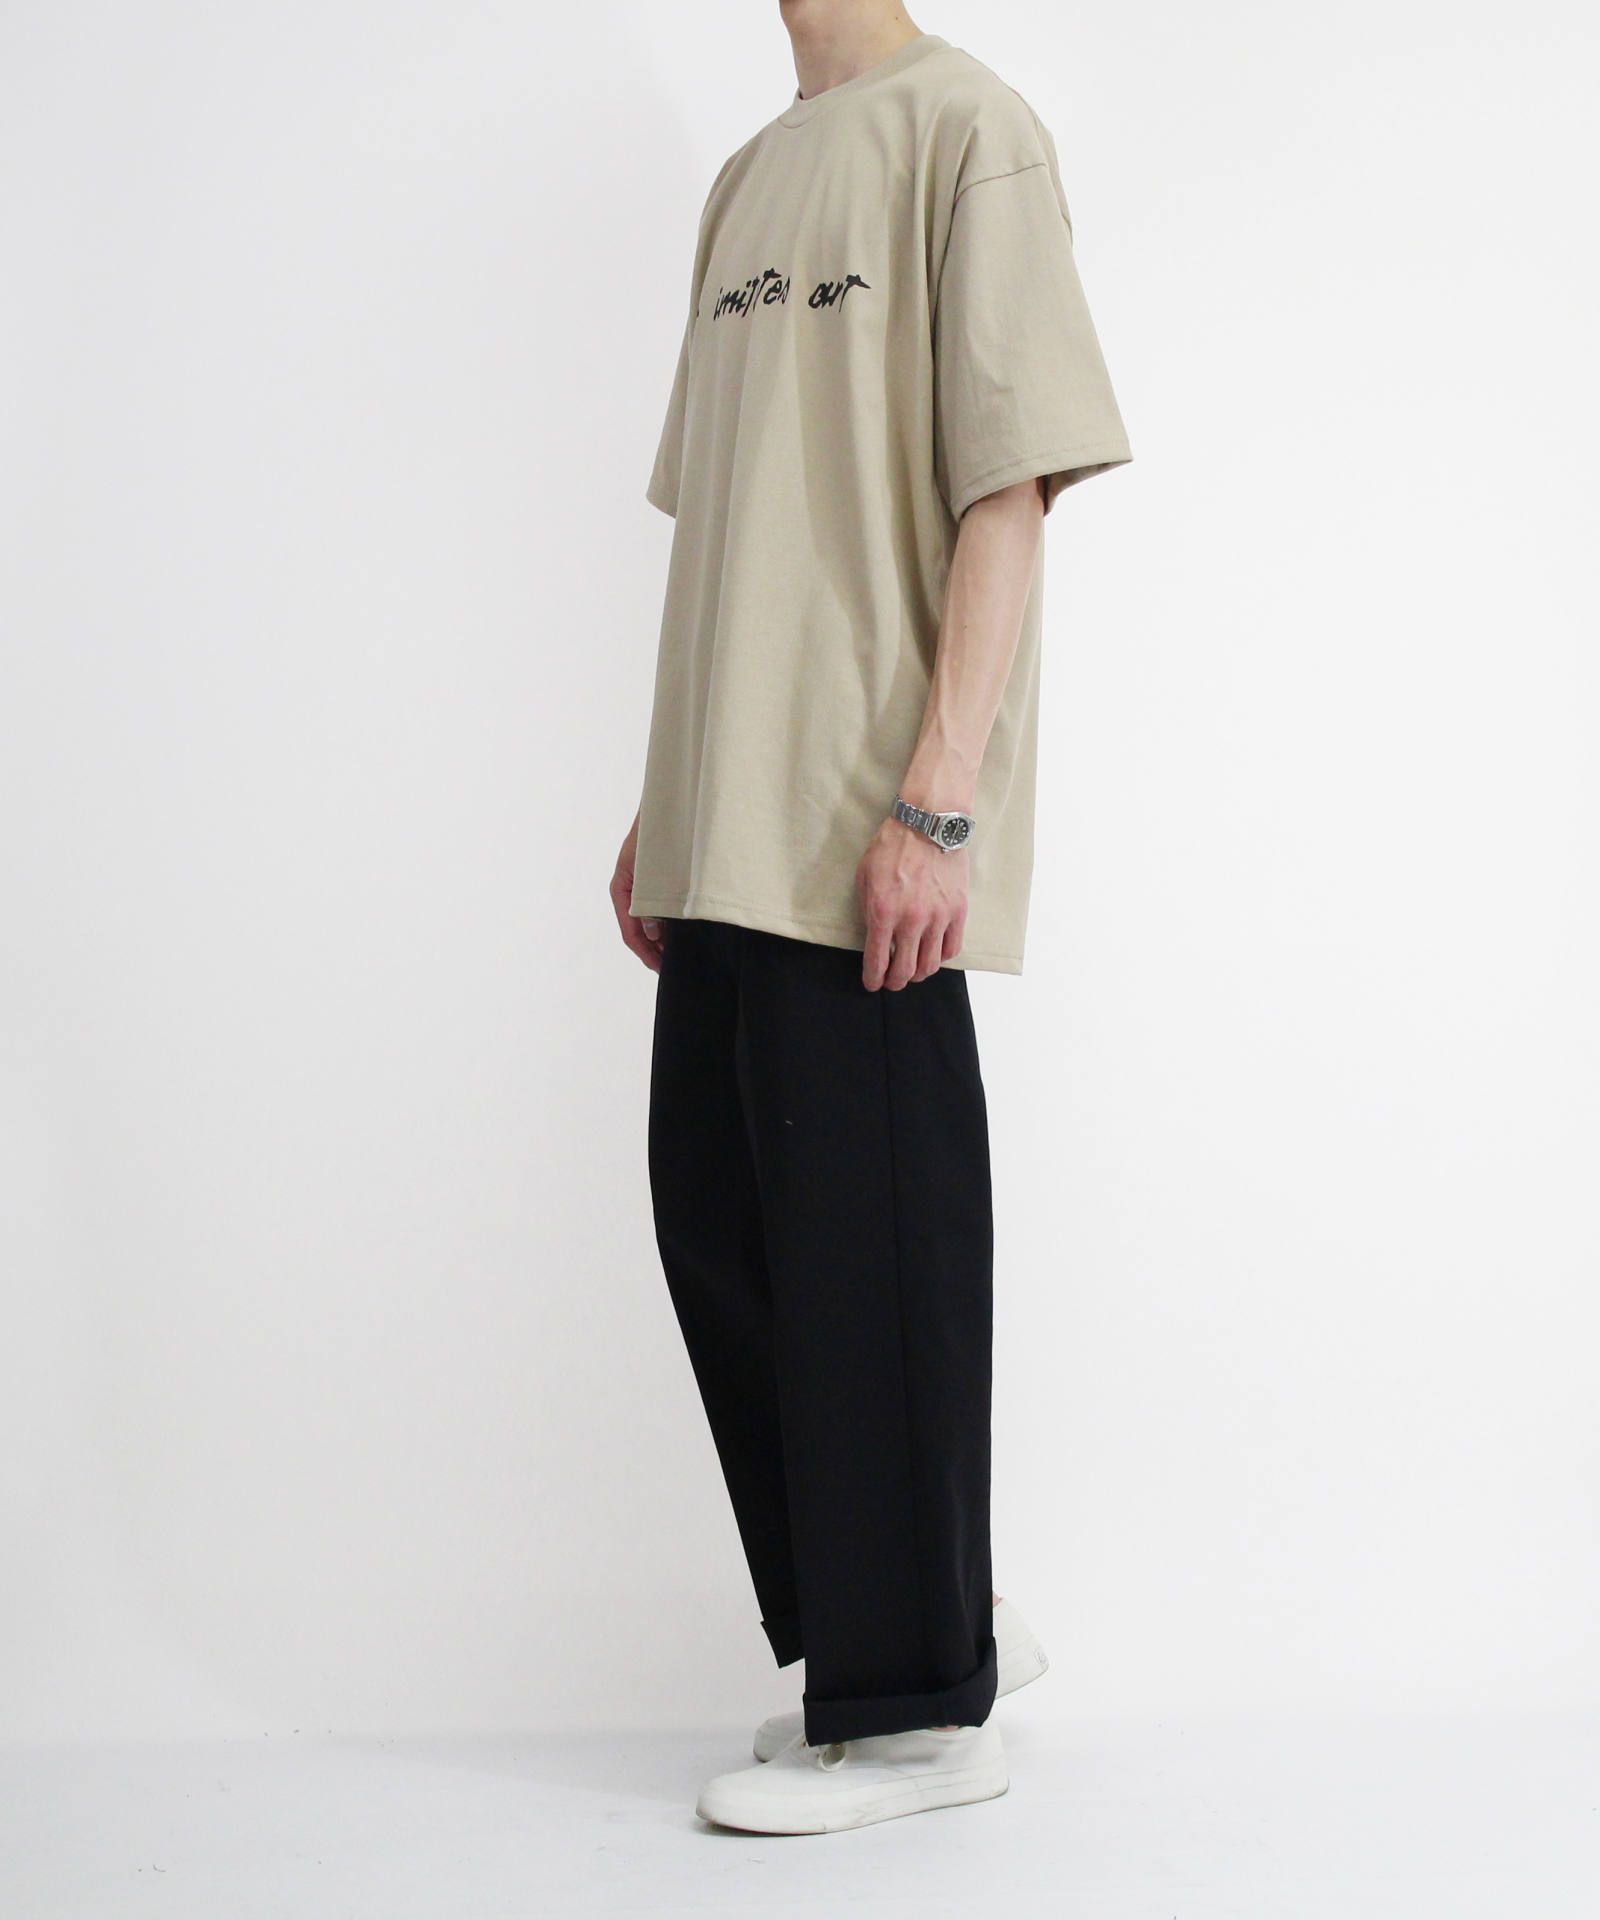 CLANE HOMME - メンズプリントTシャツ - BRUSH WRITING T/S - WHITE